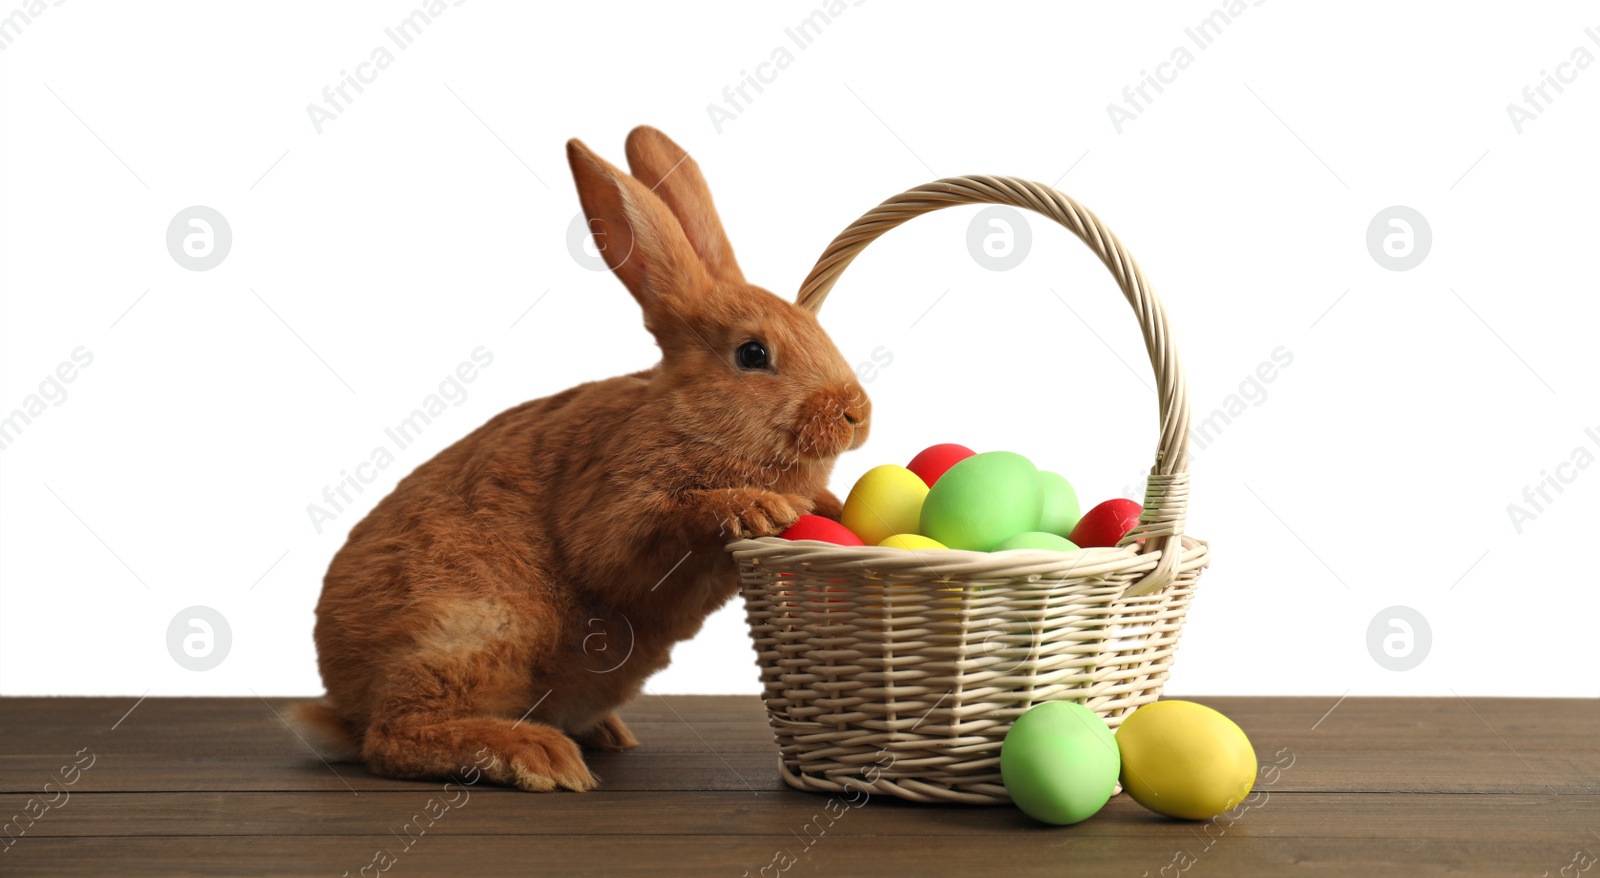 Photo of Cute bunny and basket with Easter eggs on wooden table against white background